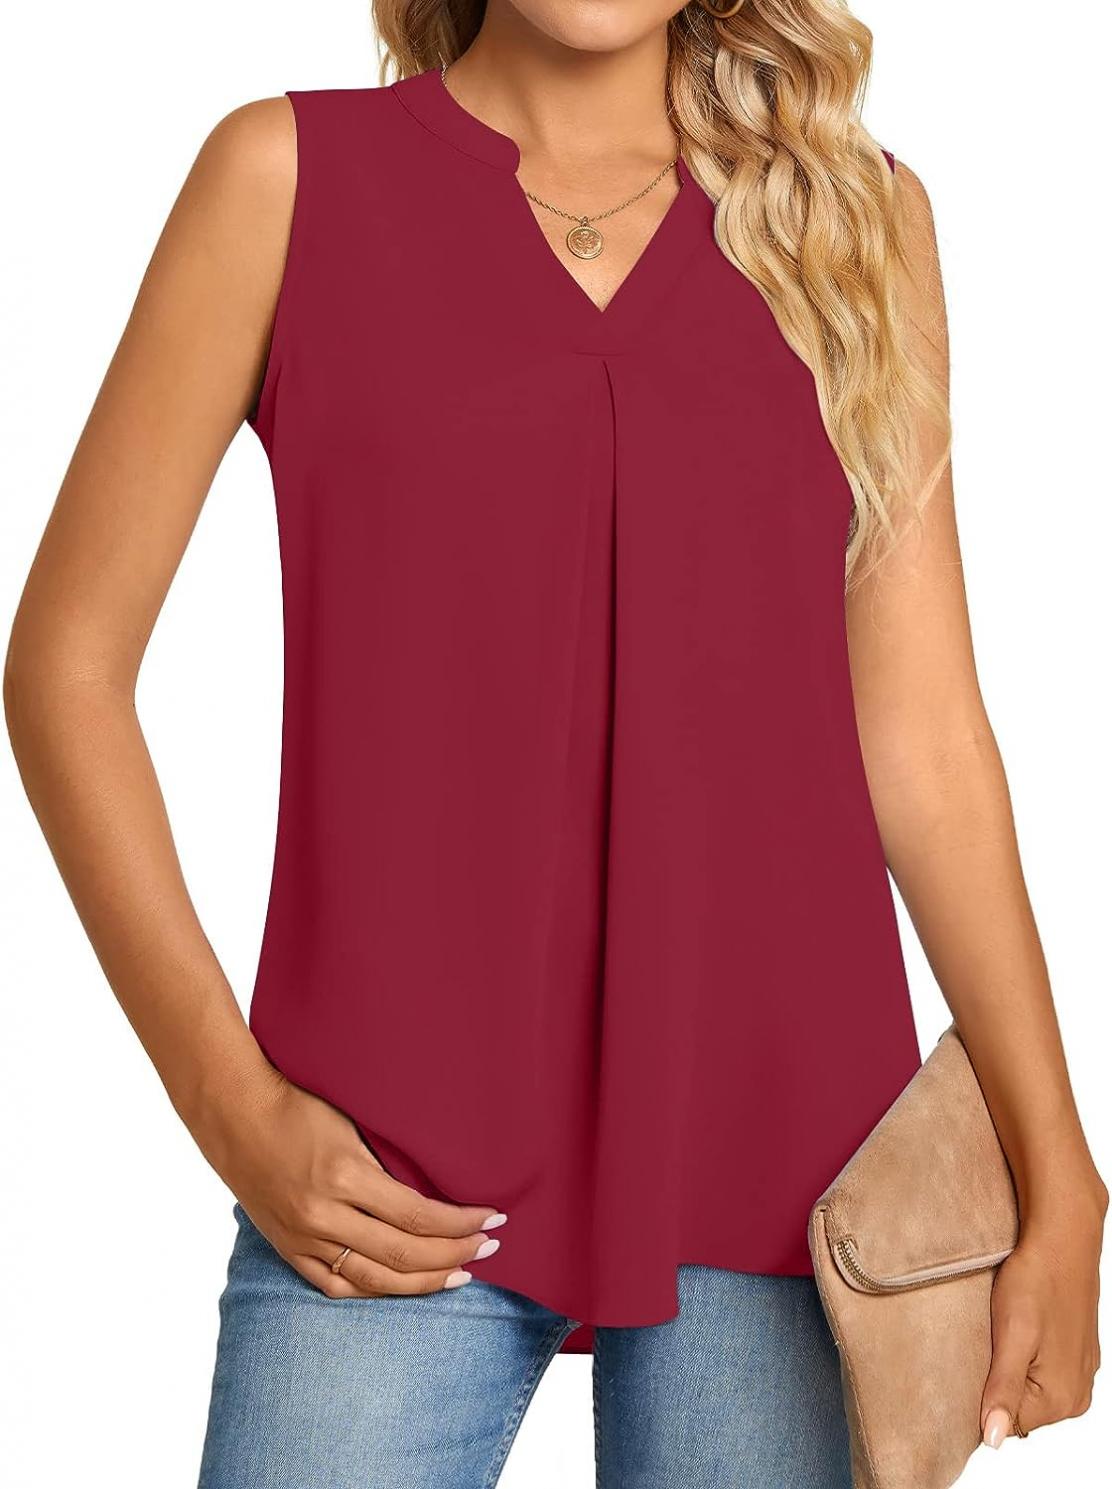 Anyhold Women's Summer Dressy Chiffon Notch V Neck Sleeveless Blouse Tops Loose Fit Casual Tank Tops Office Cute Work Shirts